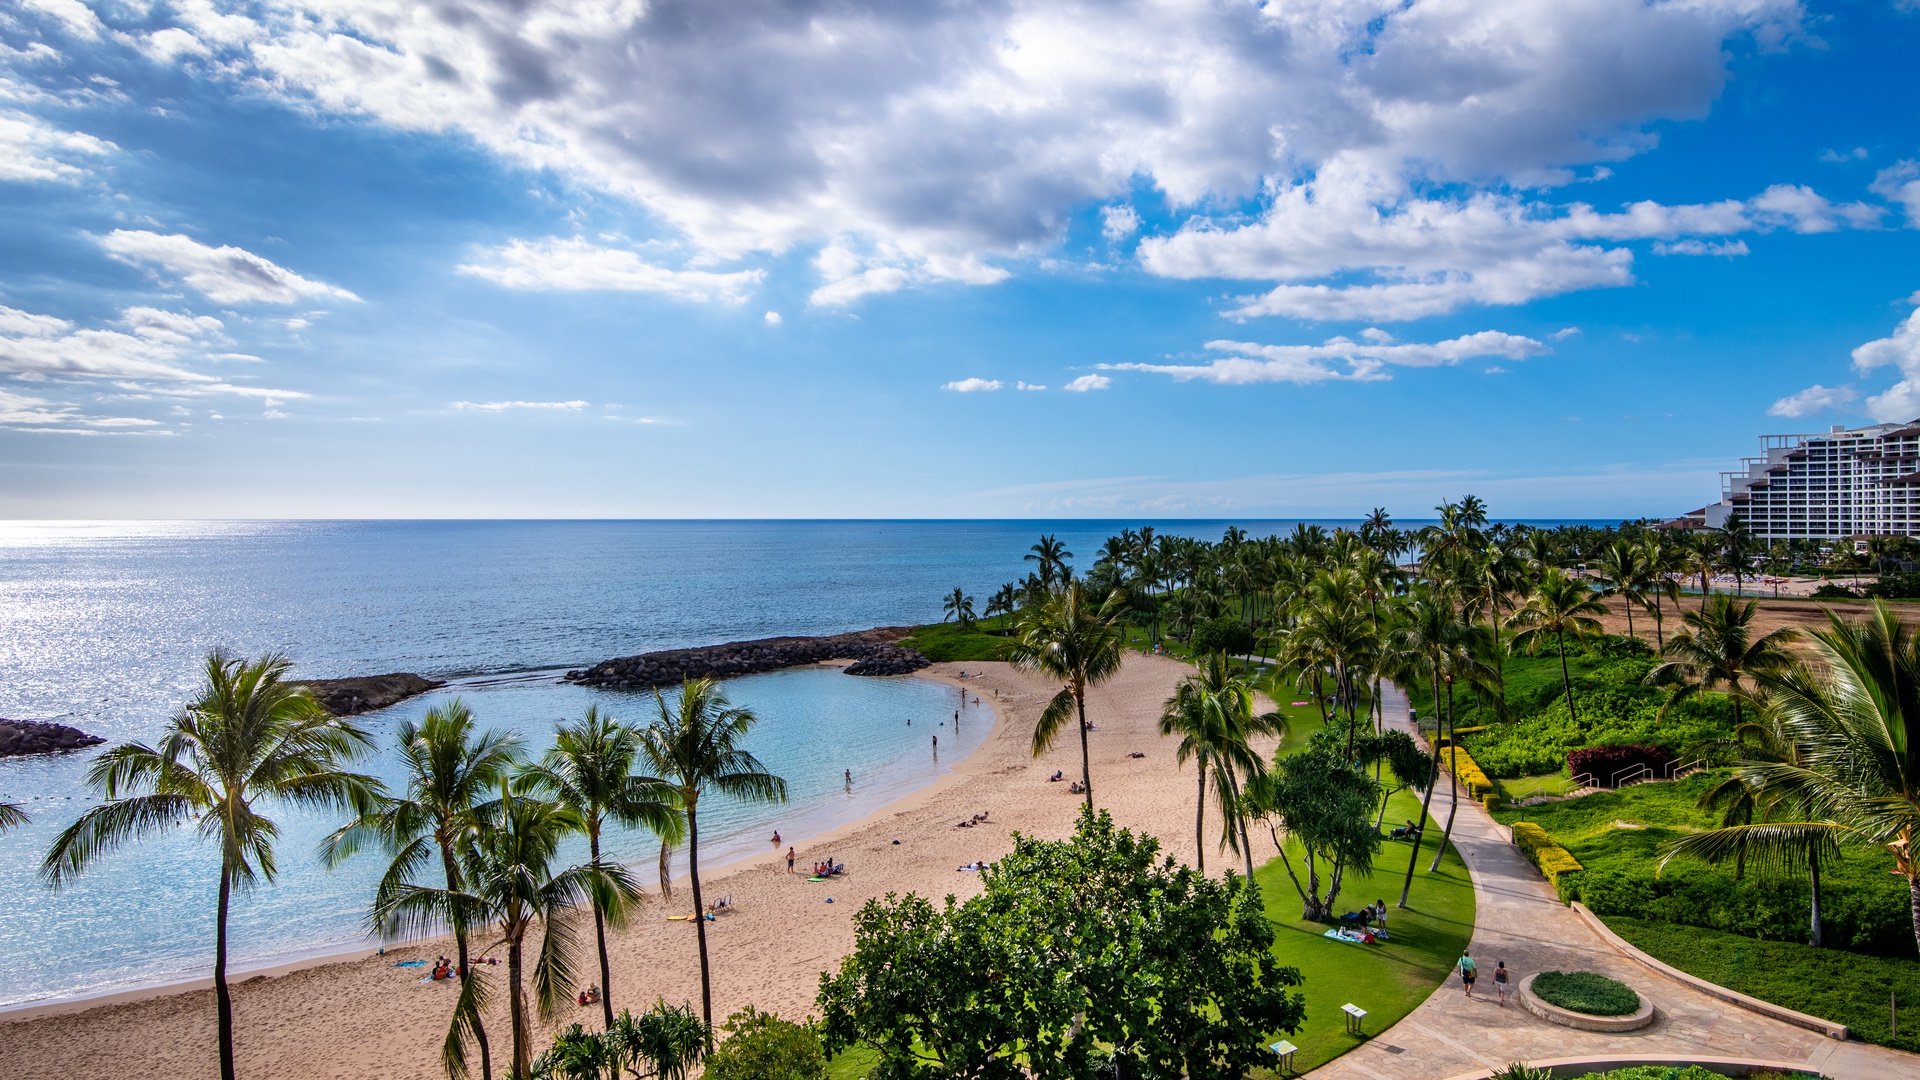 Kapolei Vacation Rentals, Ko Olina Beach Villas B609 - Another picturesque setting you will enjoy during your stay.